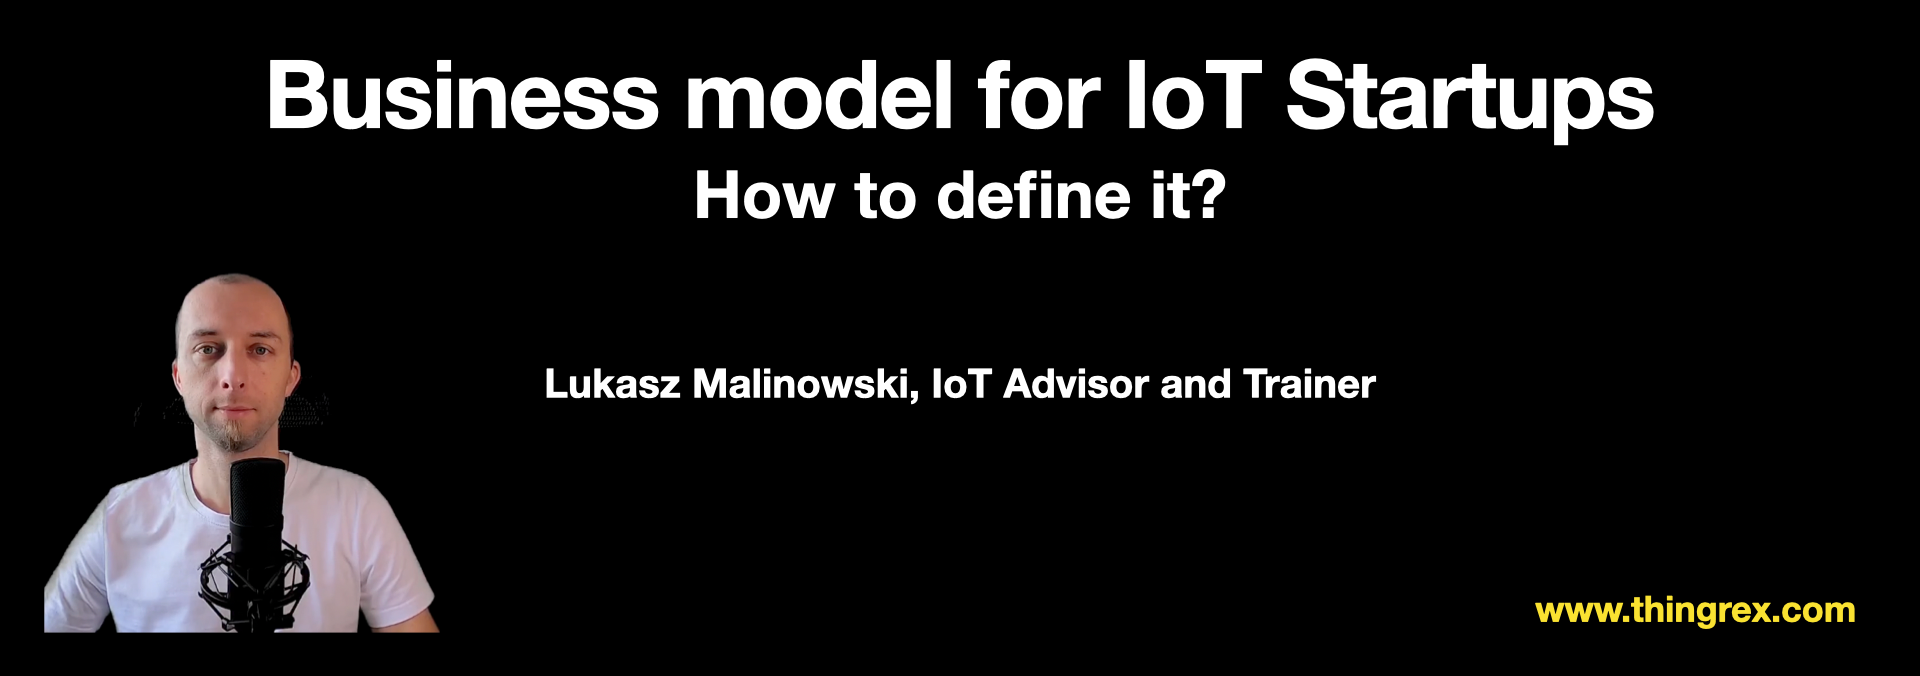 /posts/iot_business_model/iot_business_model_title.png